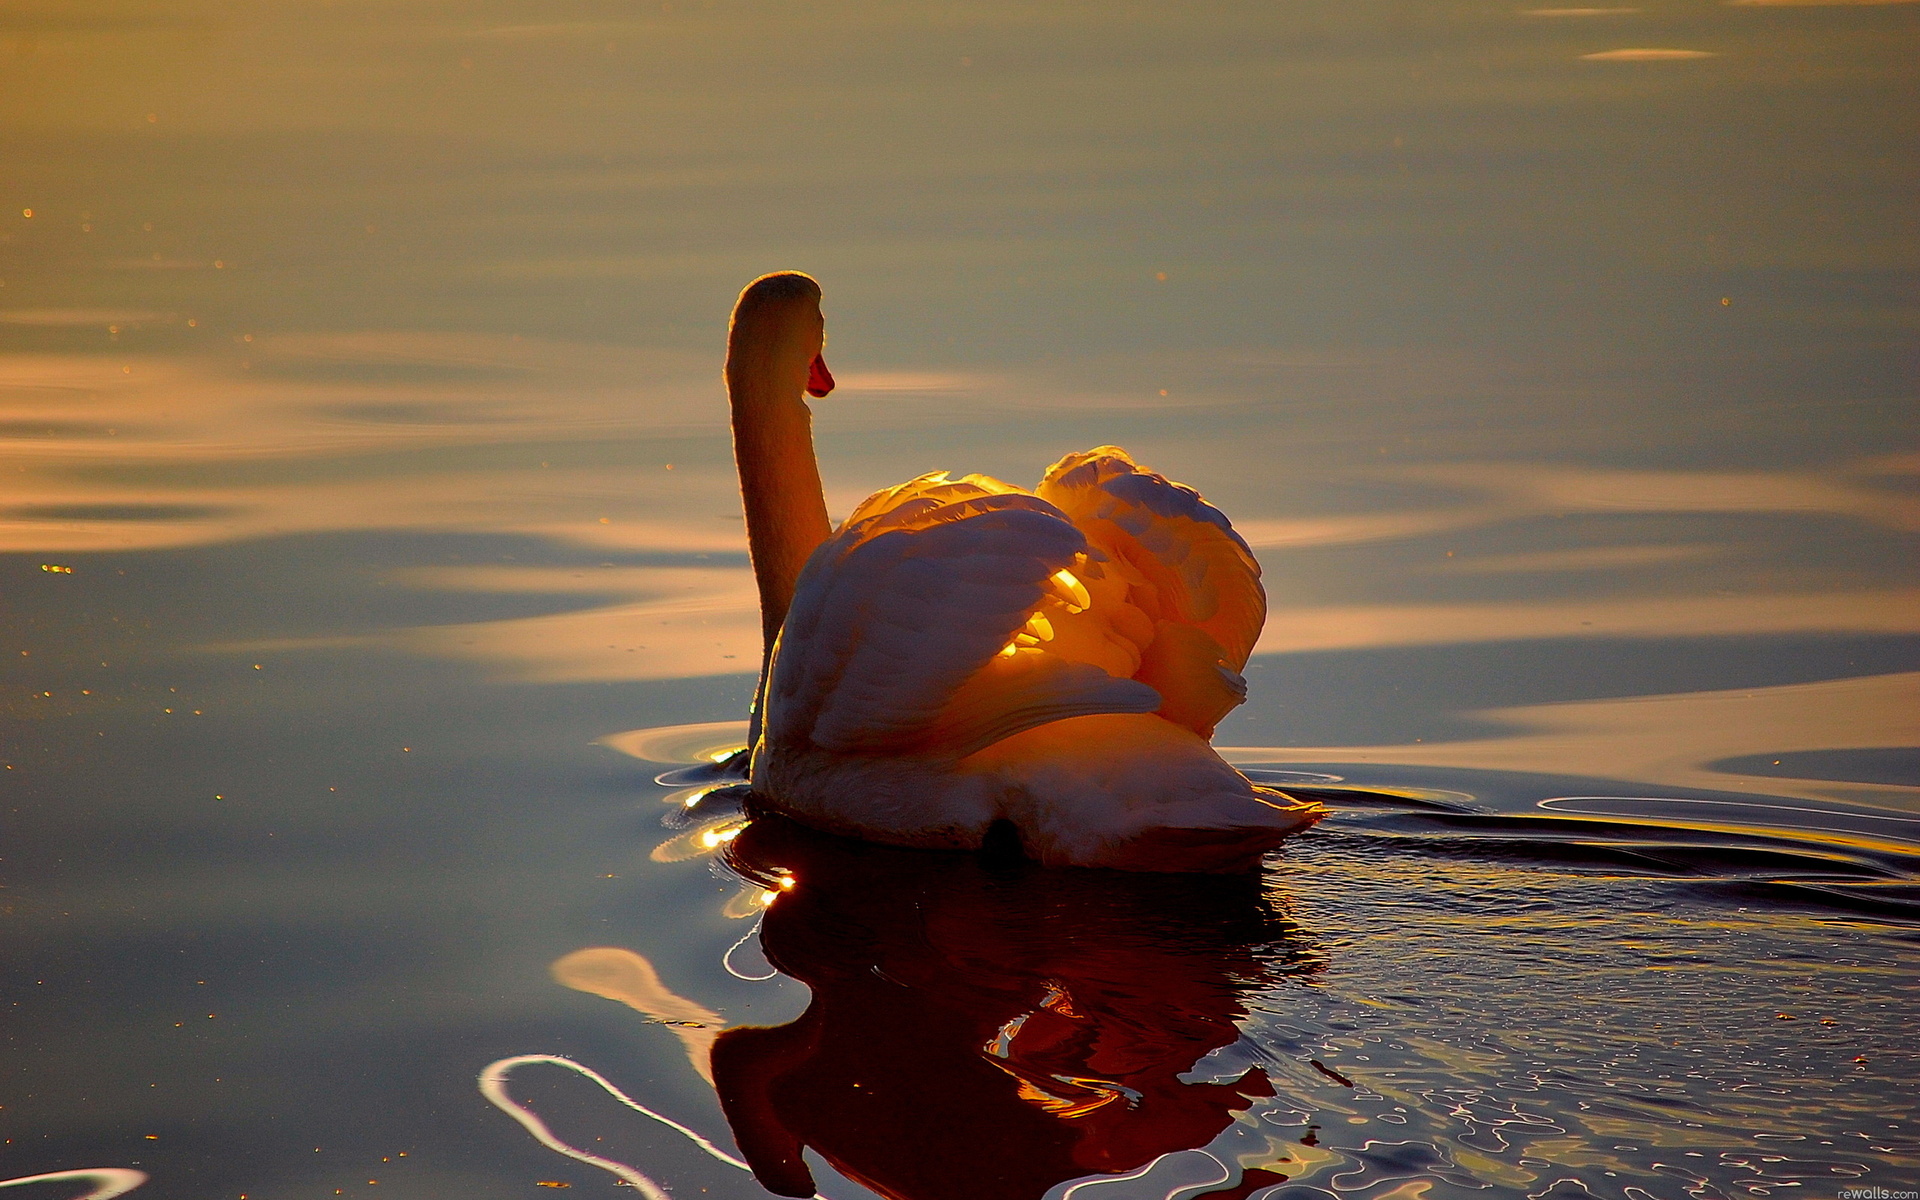 swans, Animals, Birds, Feathers, Lakes, Ponds, Water, Ripple, Reflection, Shine, Sunlight, Wings, Wildlife Wallpaper